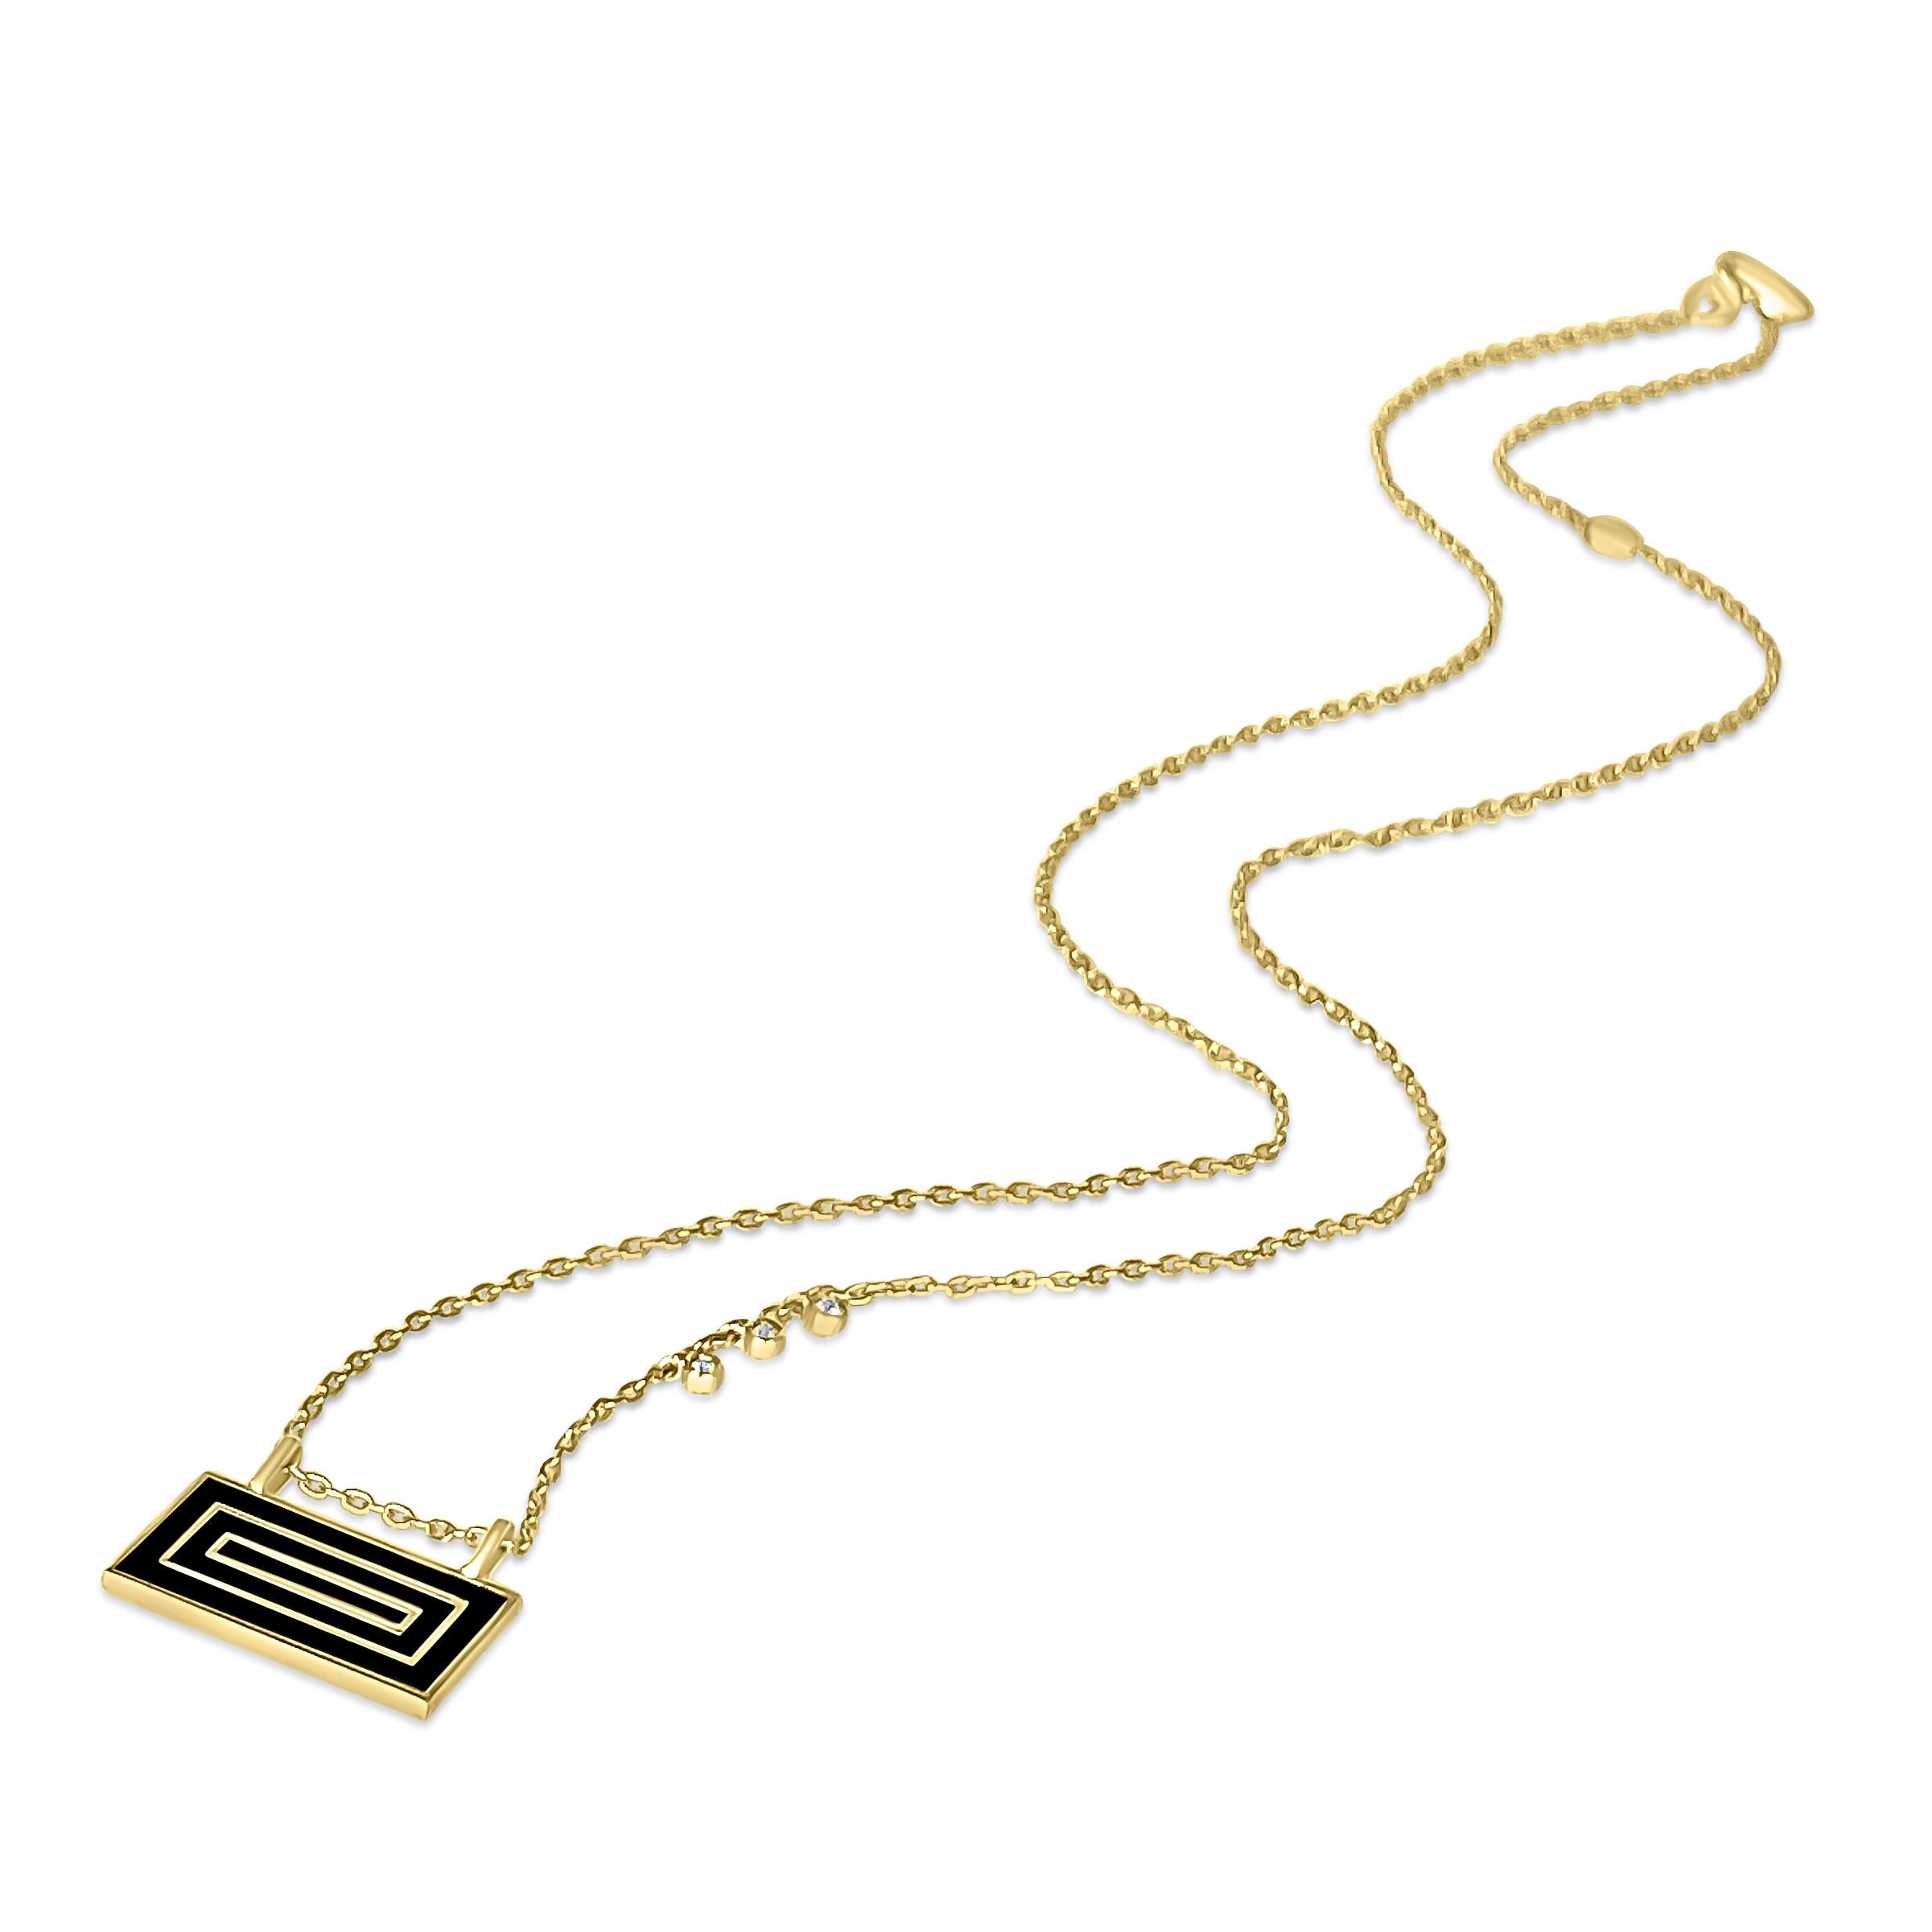 
Part of the New Vintage collection, this necklace is the perfect match for the modern woman: unique, luxurious, distinctive, and versatile.

Handcrafted from 14K solid yellow gold, this necklace features an exquisite black enamel rectangle adorned